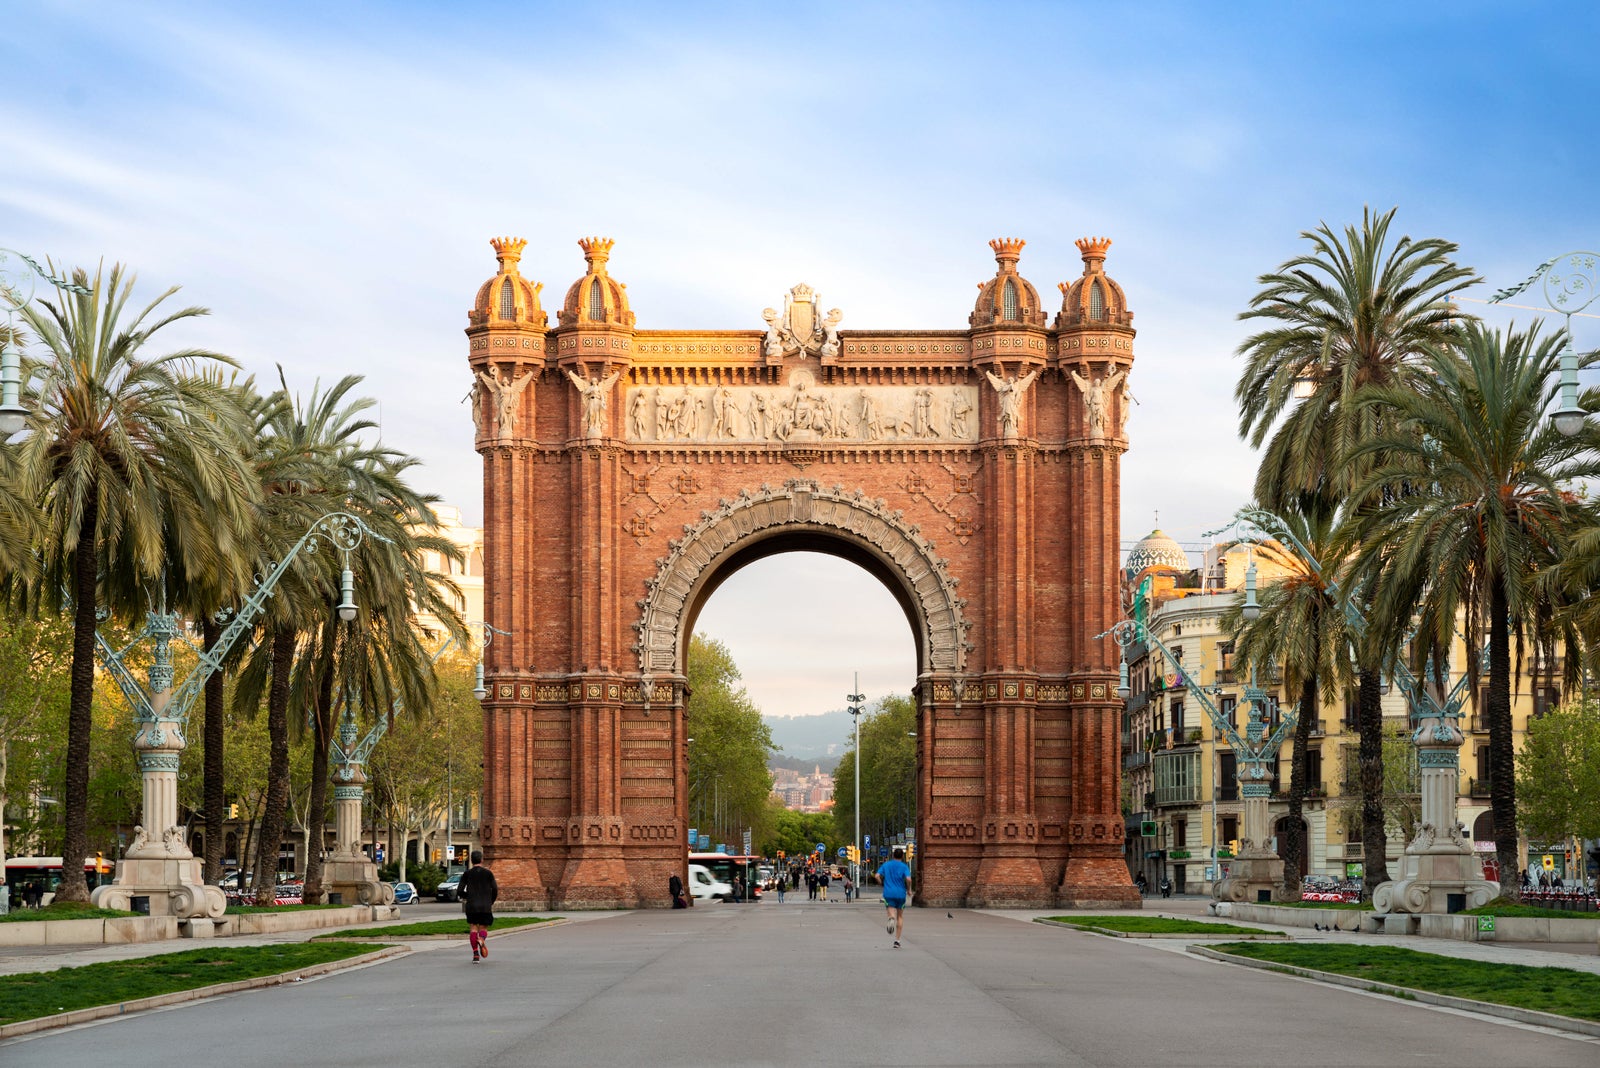 Bacelona Arc de Triomf during sunrise in the city of Barcelona in Catalonia, Spain. The arch is built in reddish brickwork in the Neo-Mudejar style